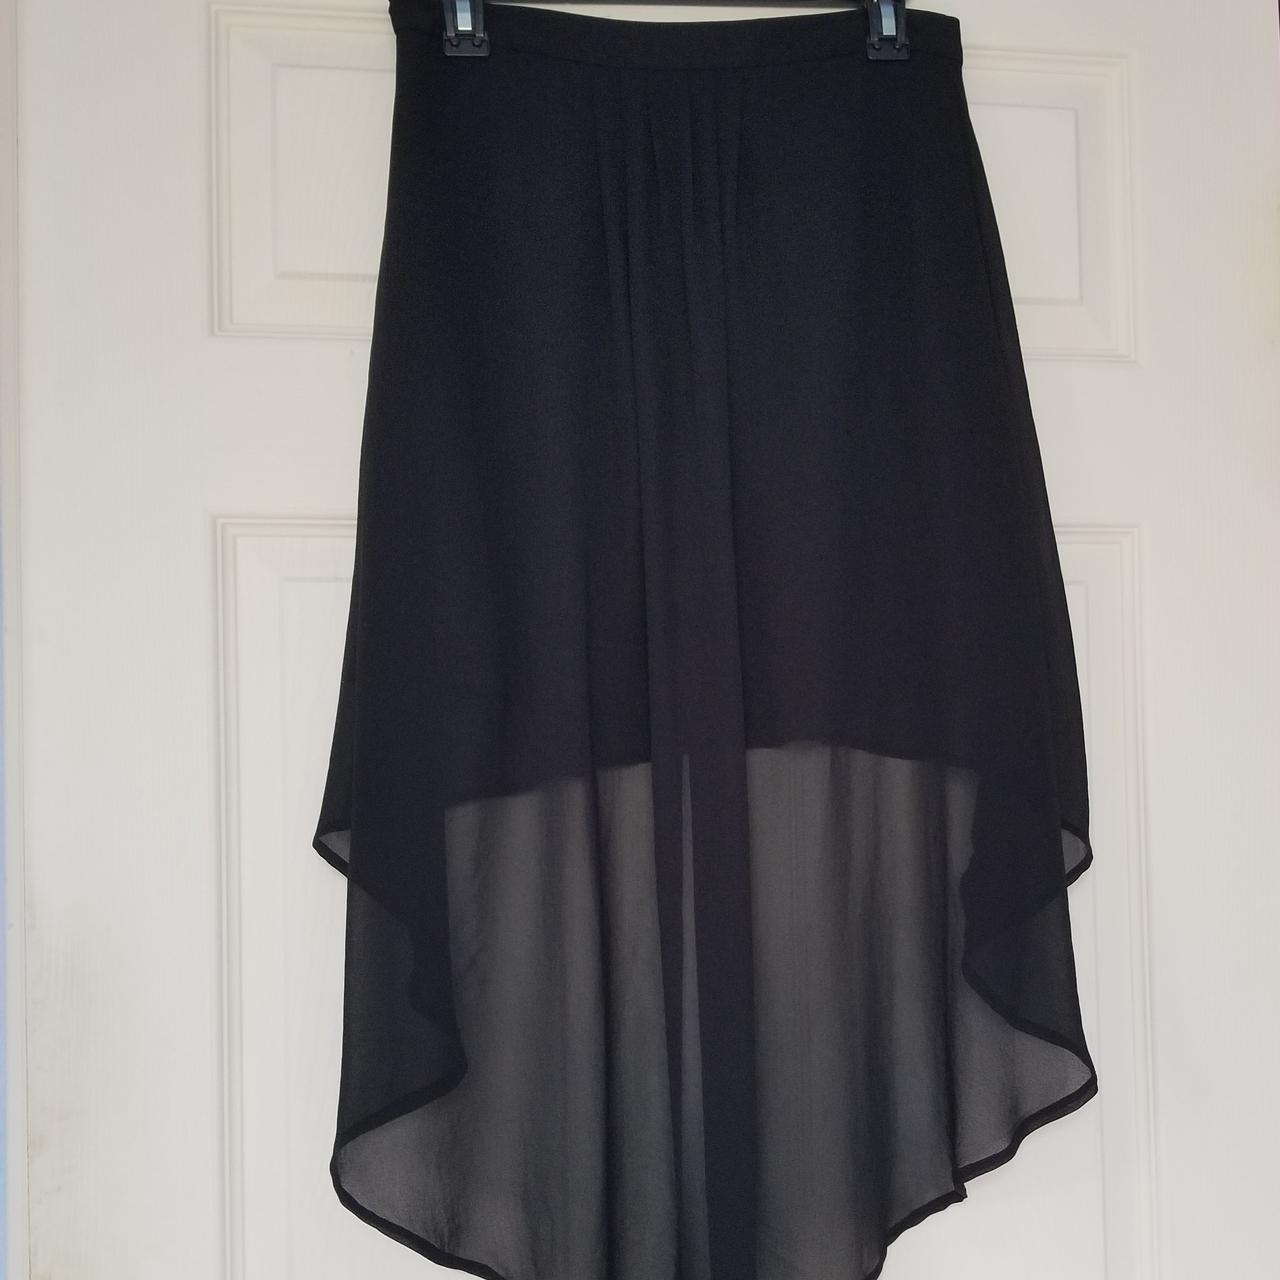 High- low train skirt! This is a cute skirt with... - Depop